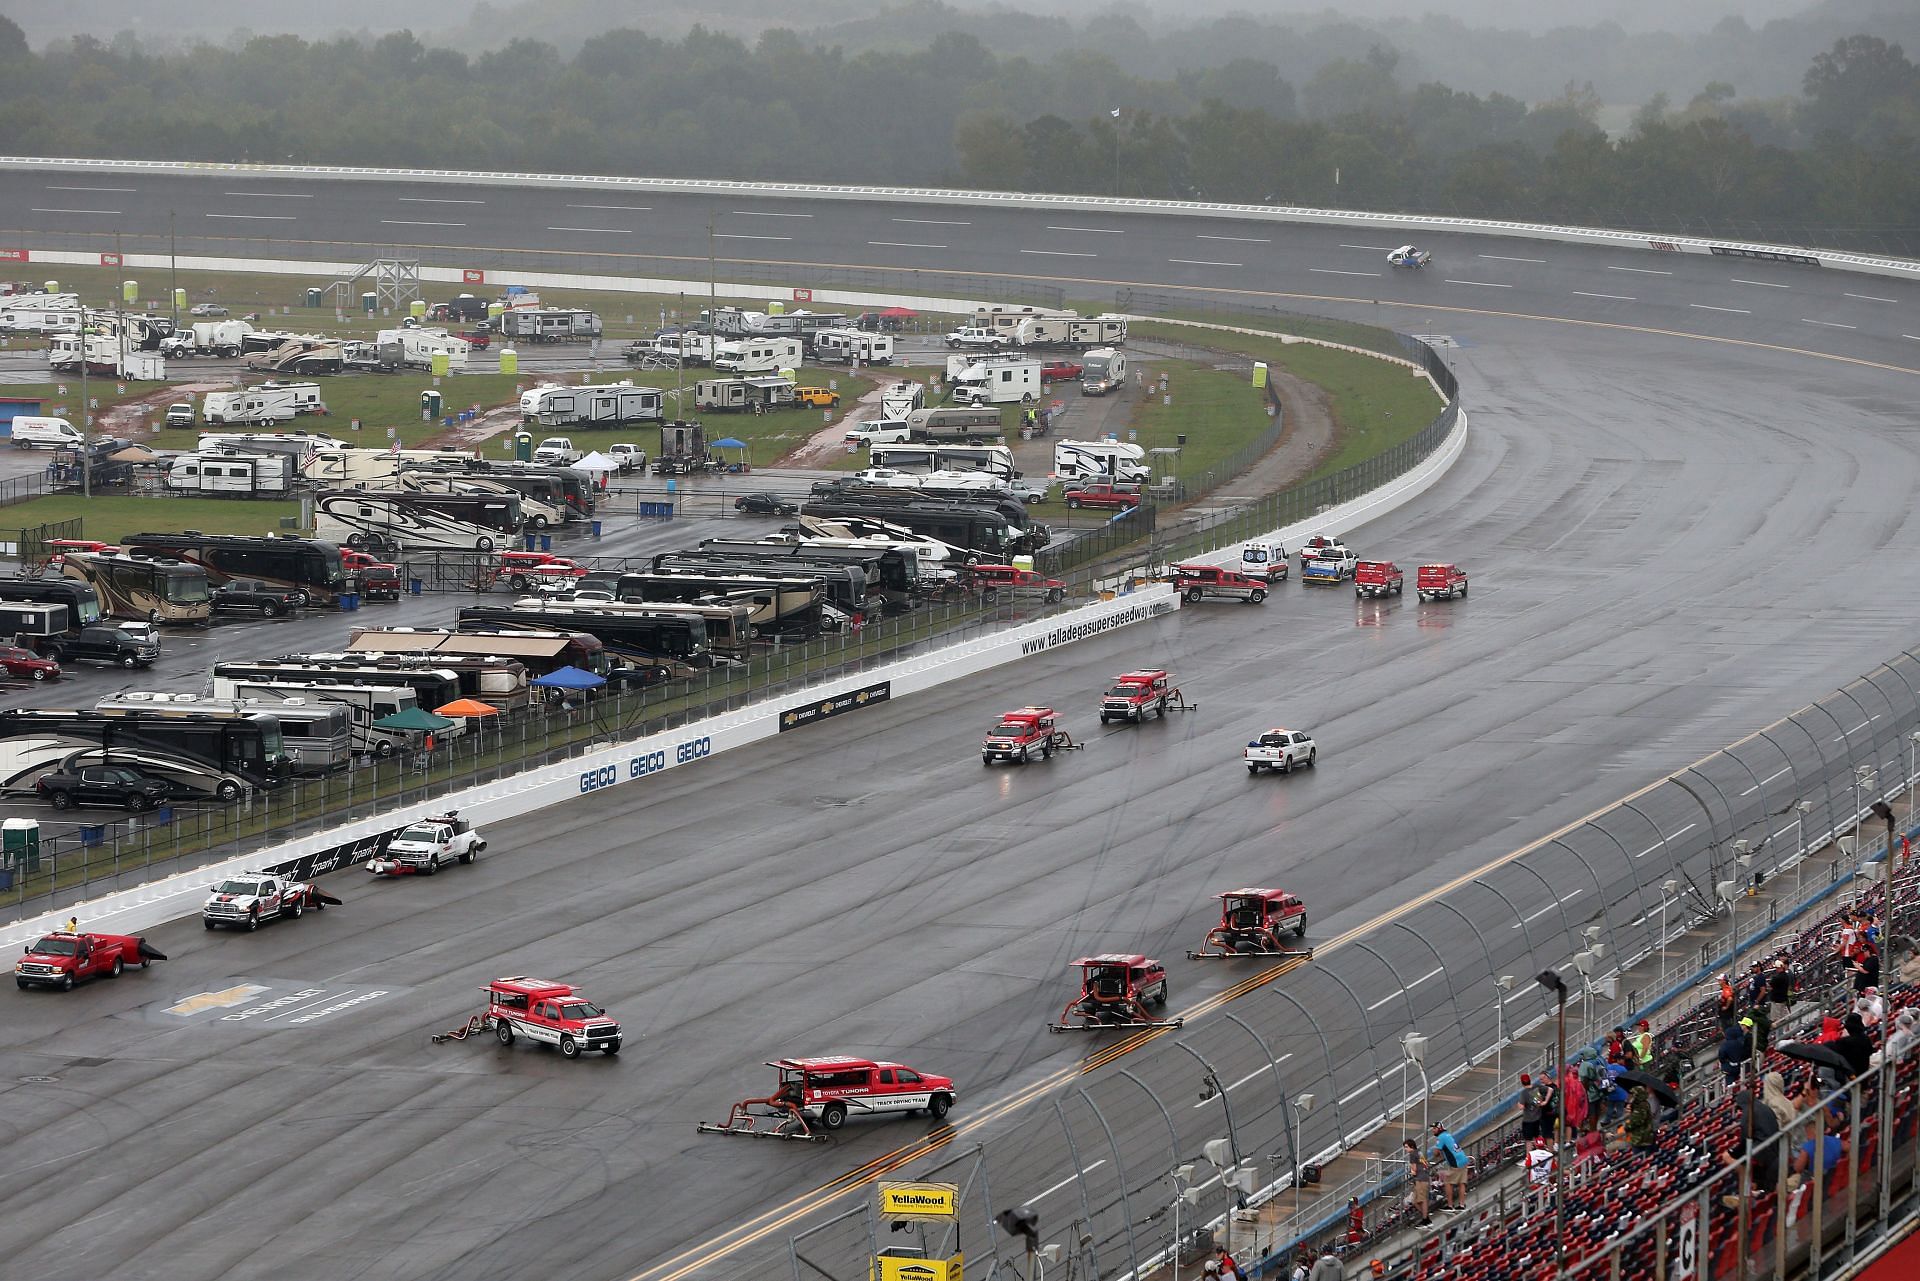 The Track Drying Team works to dry the track during a rain delay in the NASCAR Cup Series YellaWood 500 at Talladega Superspeedway in 2021. (Photo by Brian Lawdermilk/Getty Images)